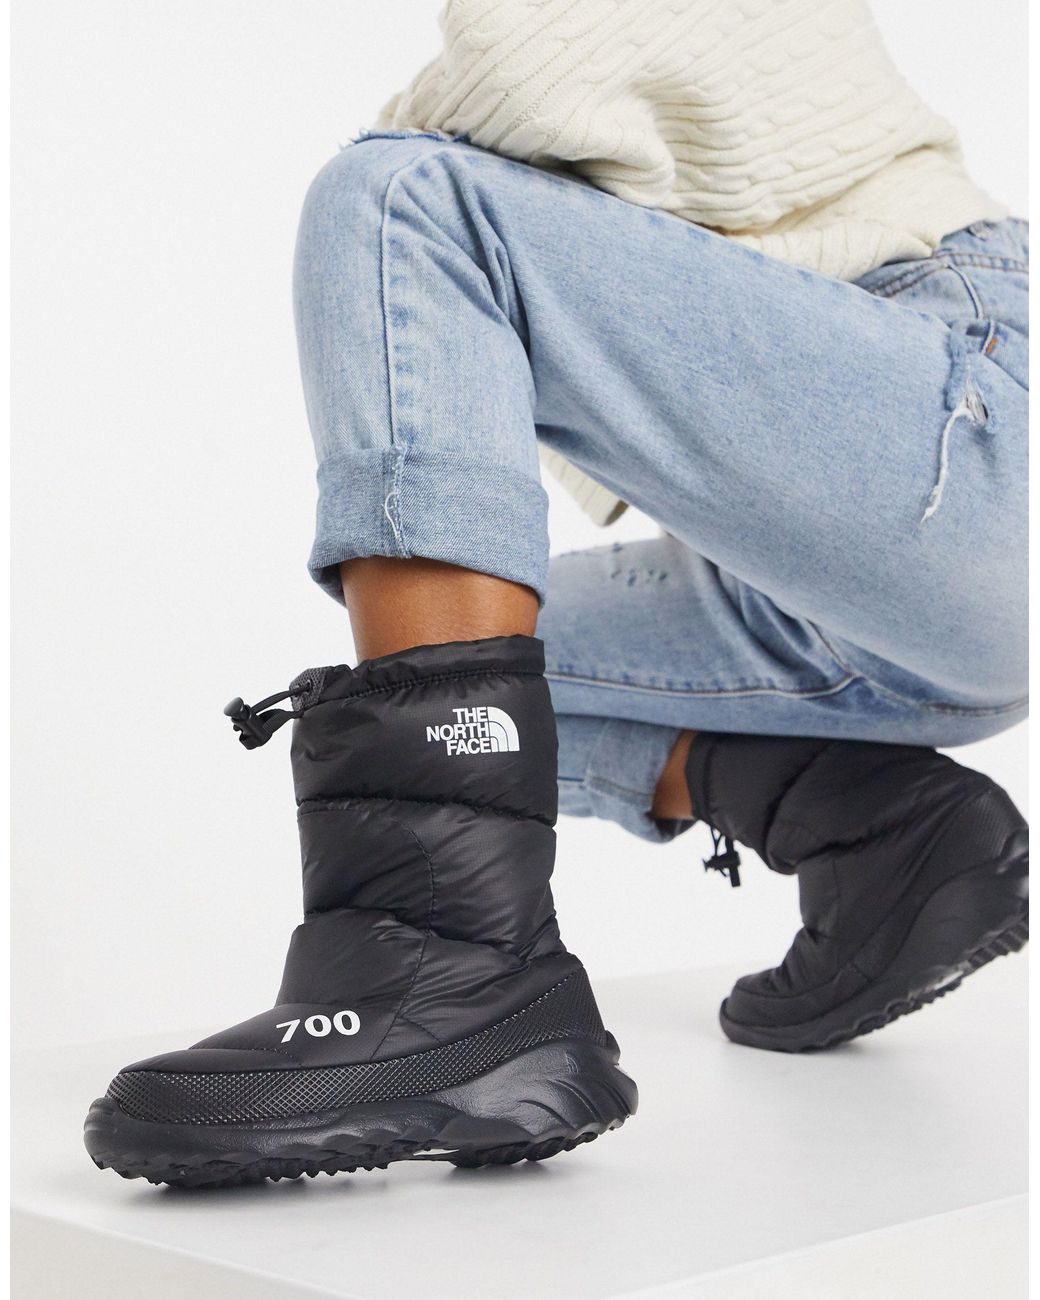 North Face 700 Boot Black | Lyst